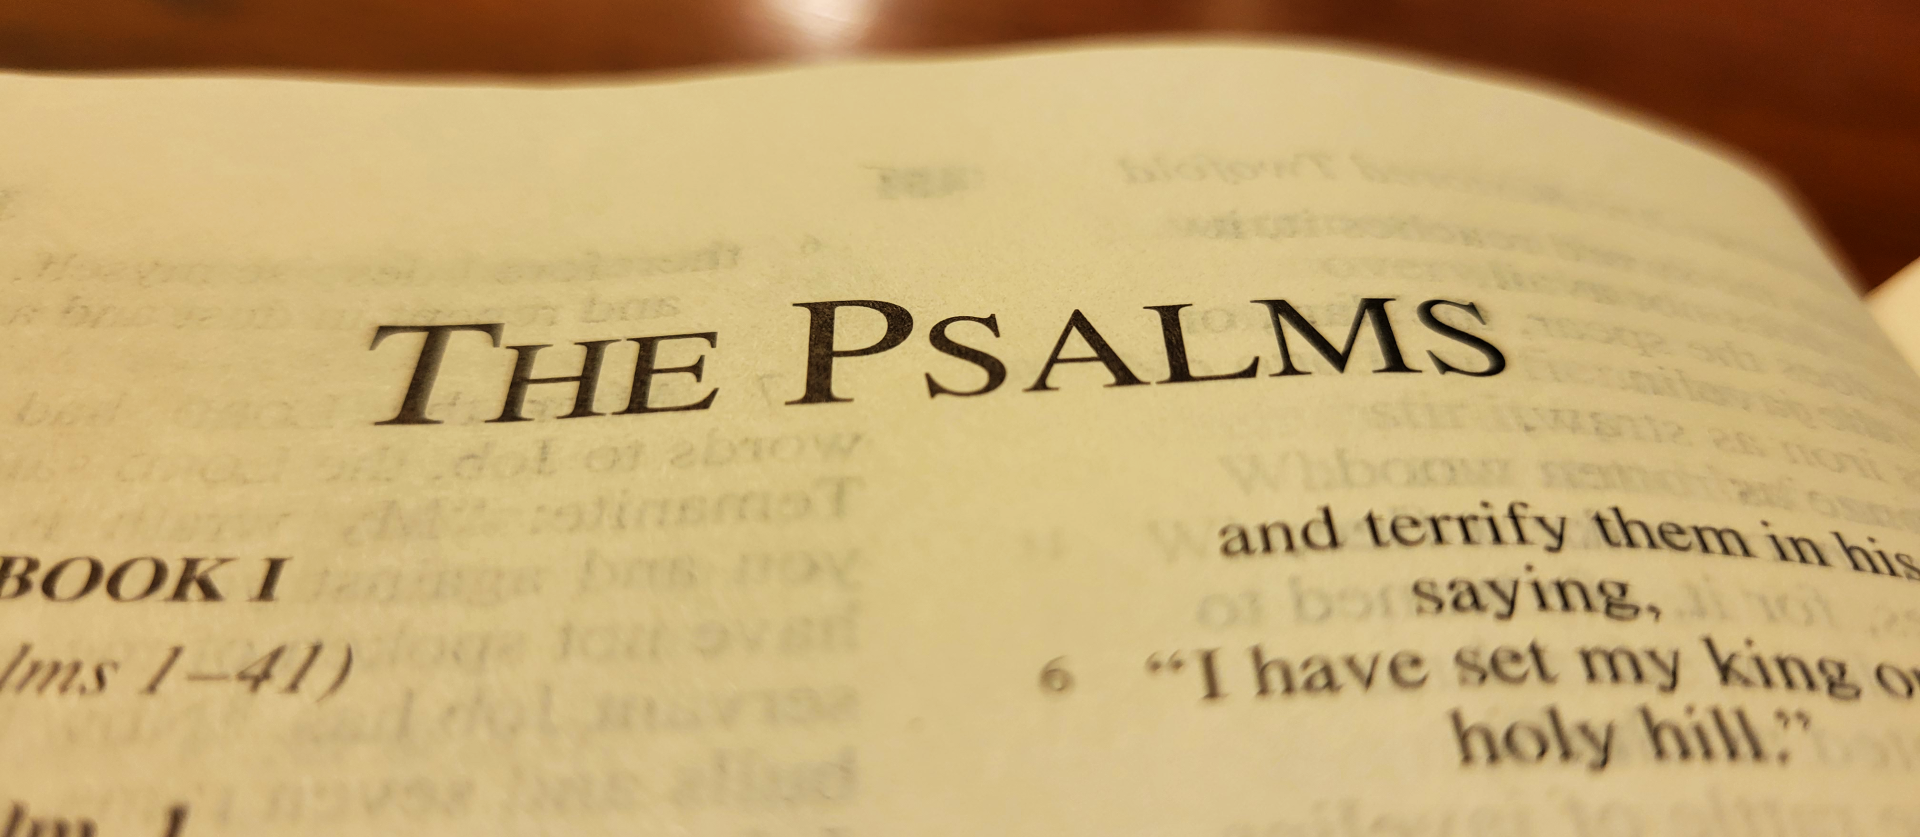 Photo of "The Psalms" page in the Holy Bible